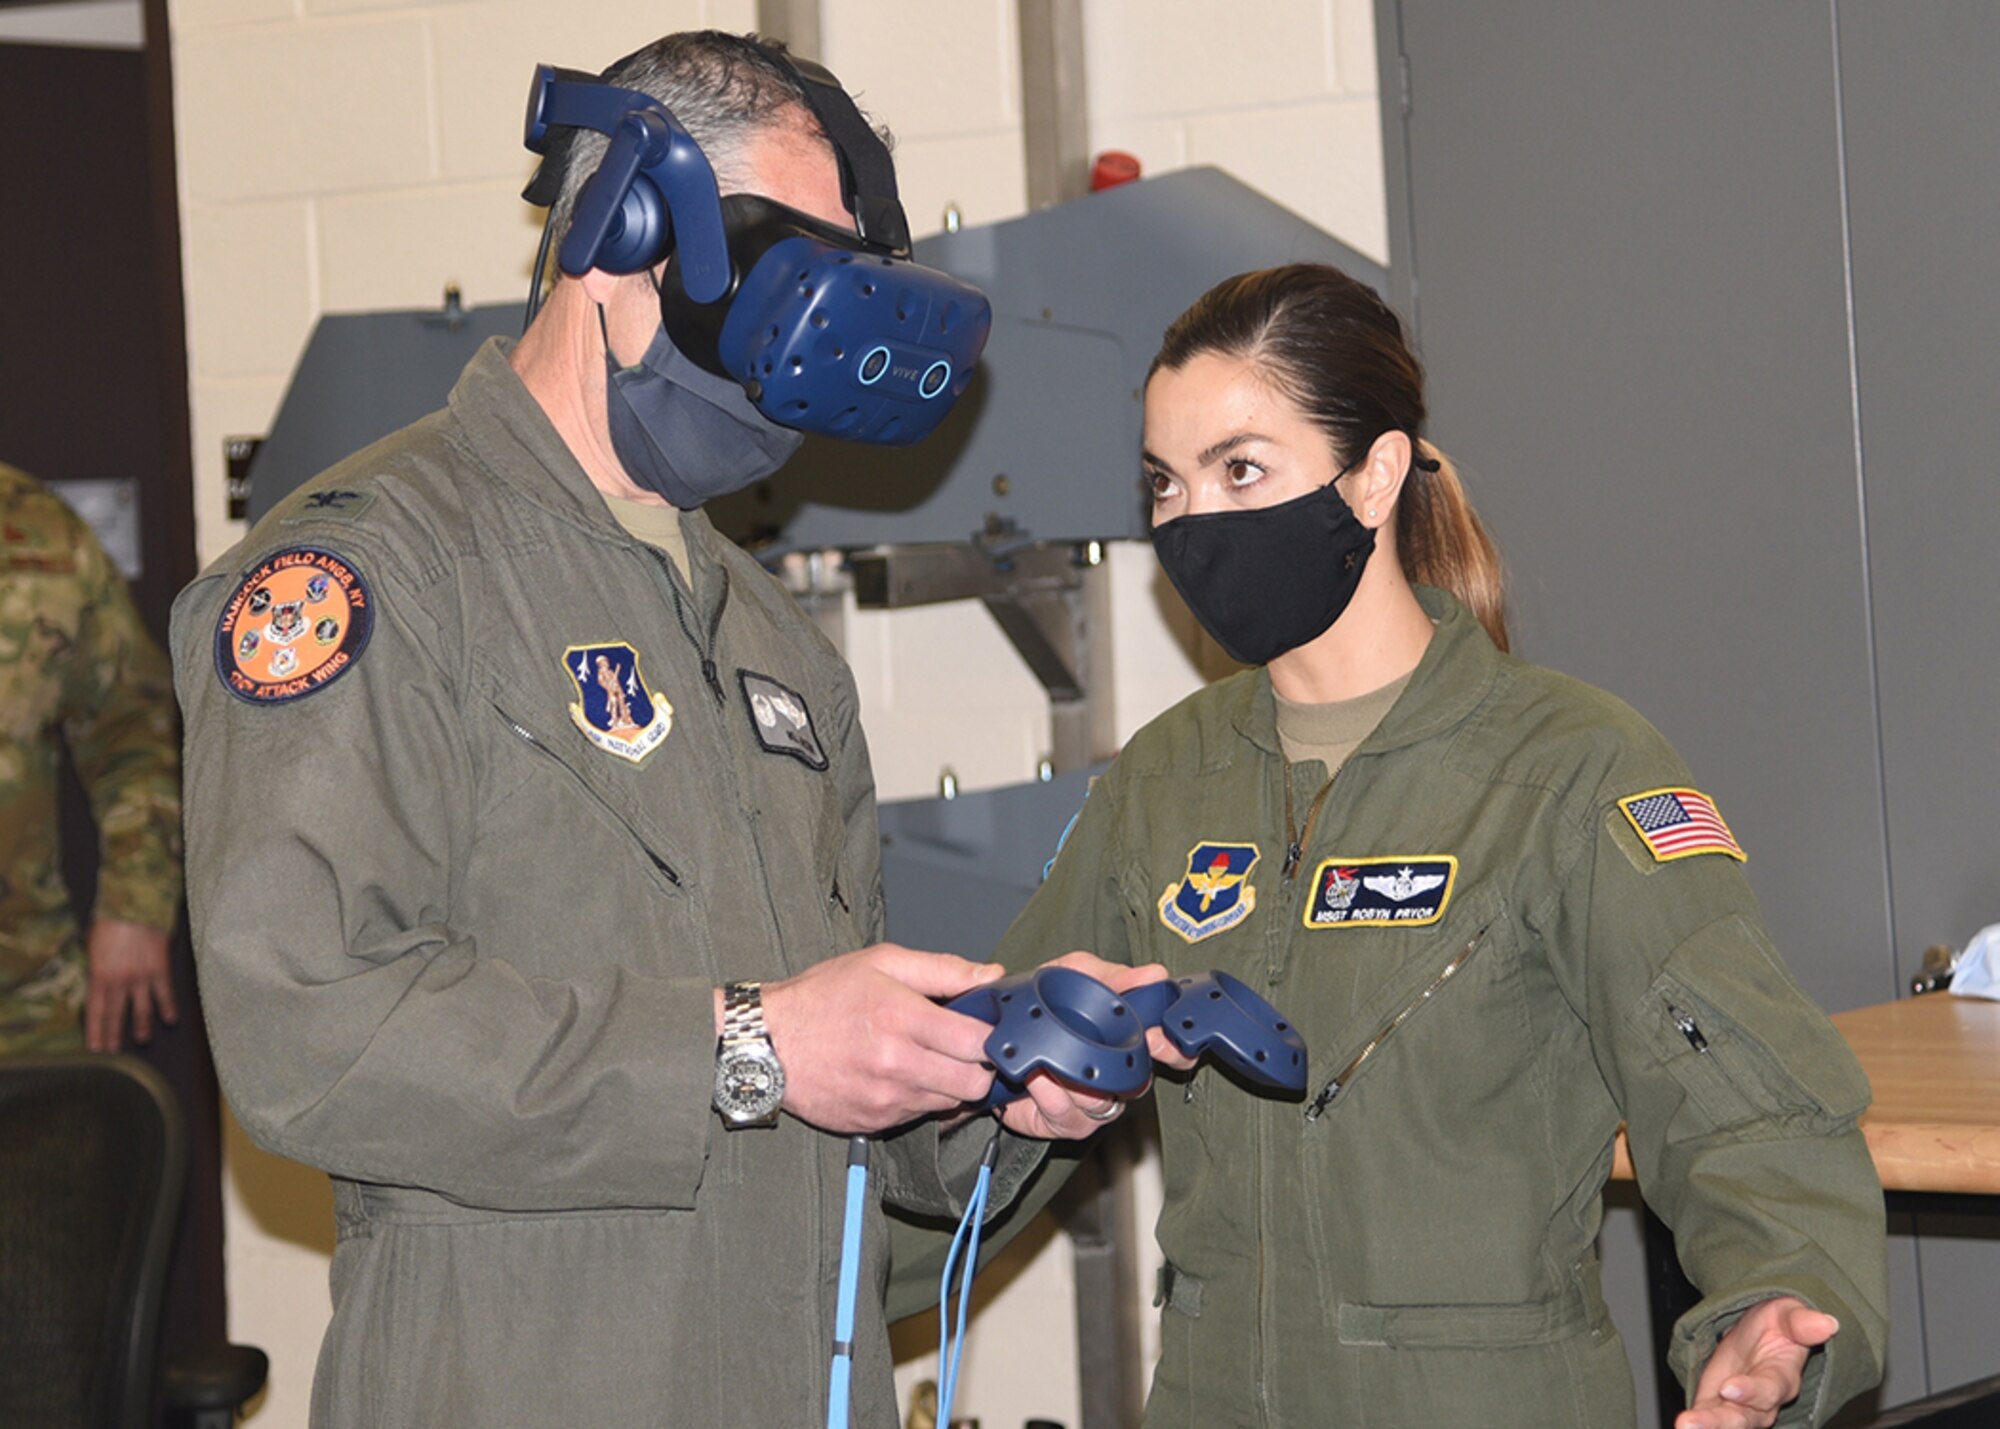 Master Sgt. Robyn Pryor., (right) from Air Education and Training Command, helps Col. William McCrink III, the commander of the 174th Attack Wing, with a demo virtual reality system. The system has two controllers with sensors, headset and a laptop with software that allows the user to explore an aircraft in different digital environments for training purposes. (U.S. Air Force photo by Master Sgt. Barbara Olney)